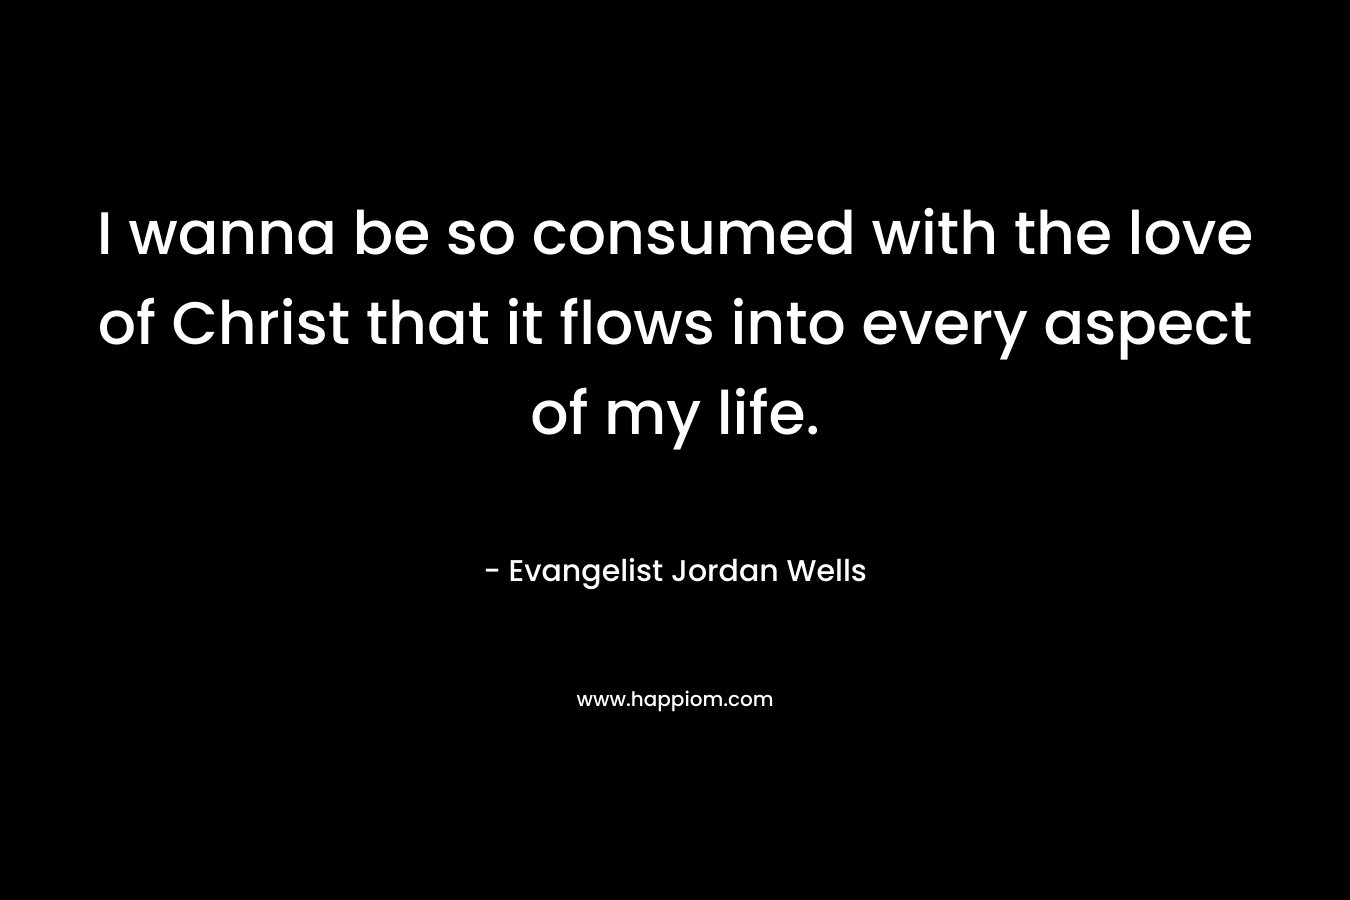 I wanna be so consumed with the love of Christ that it flows into every aspect of my life.